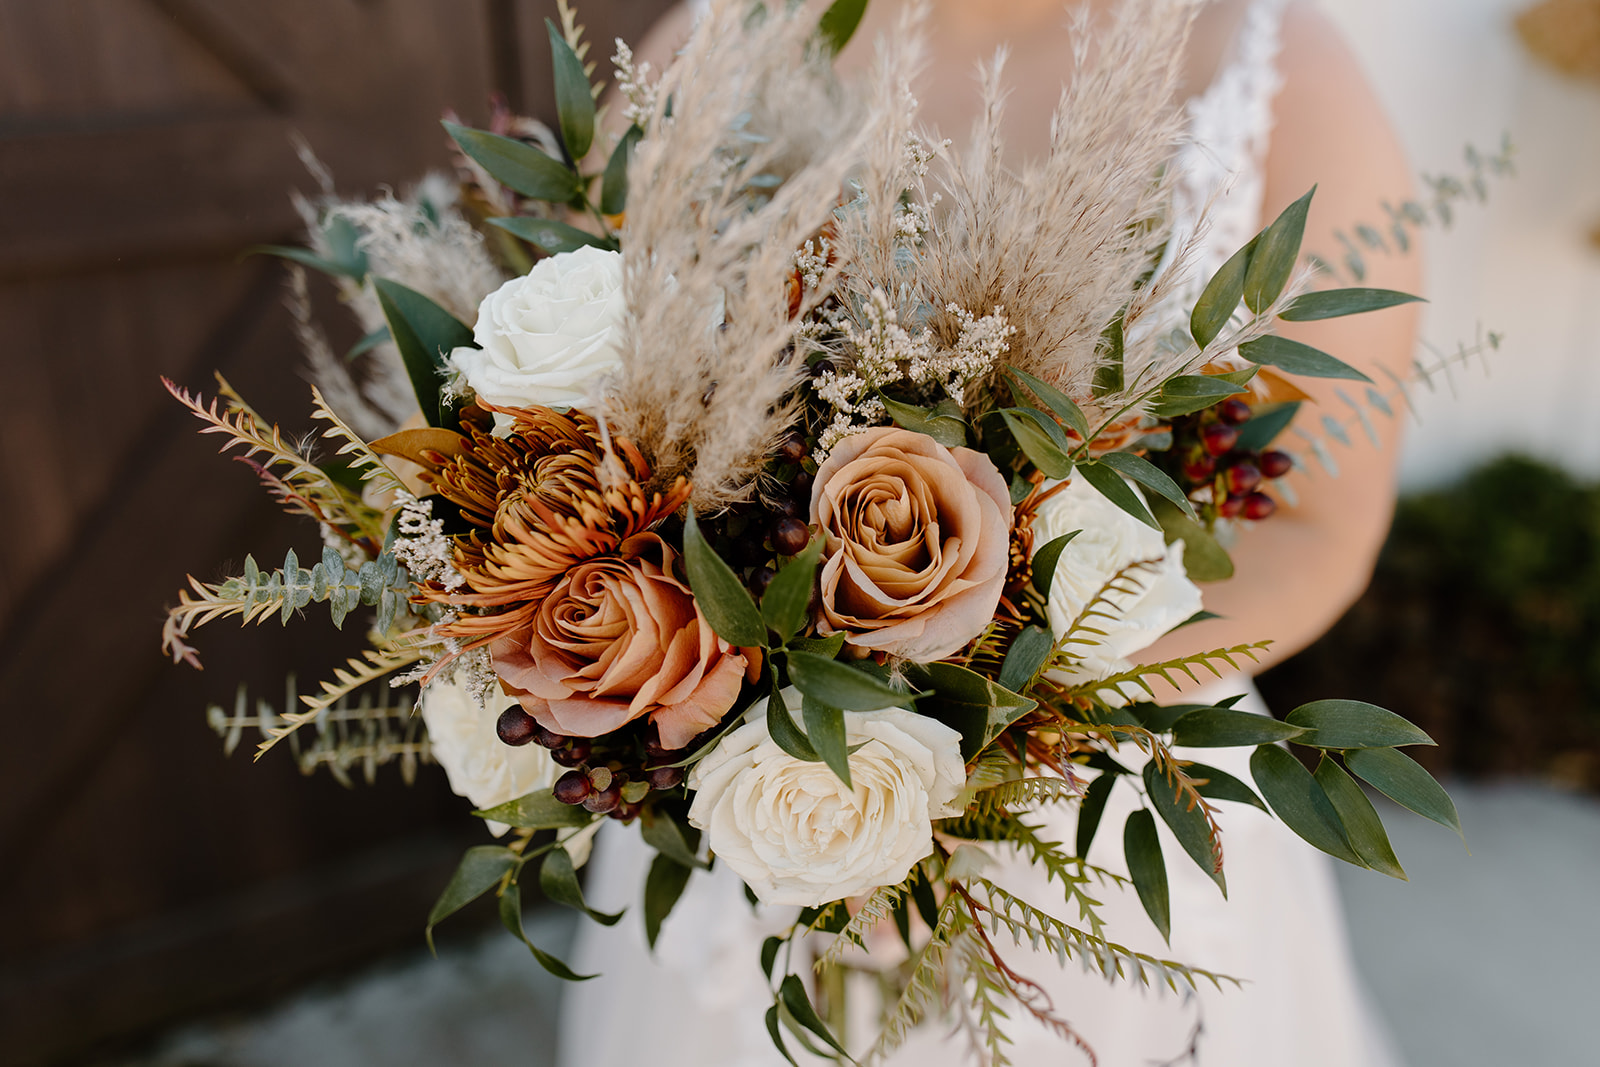 Bridal bouquet with roses and pampas grass